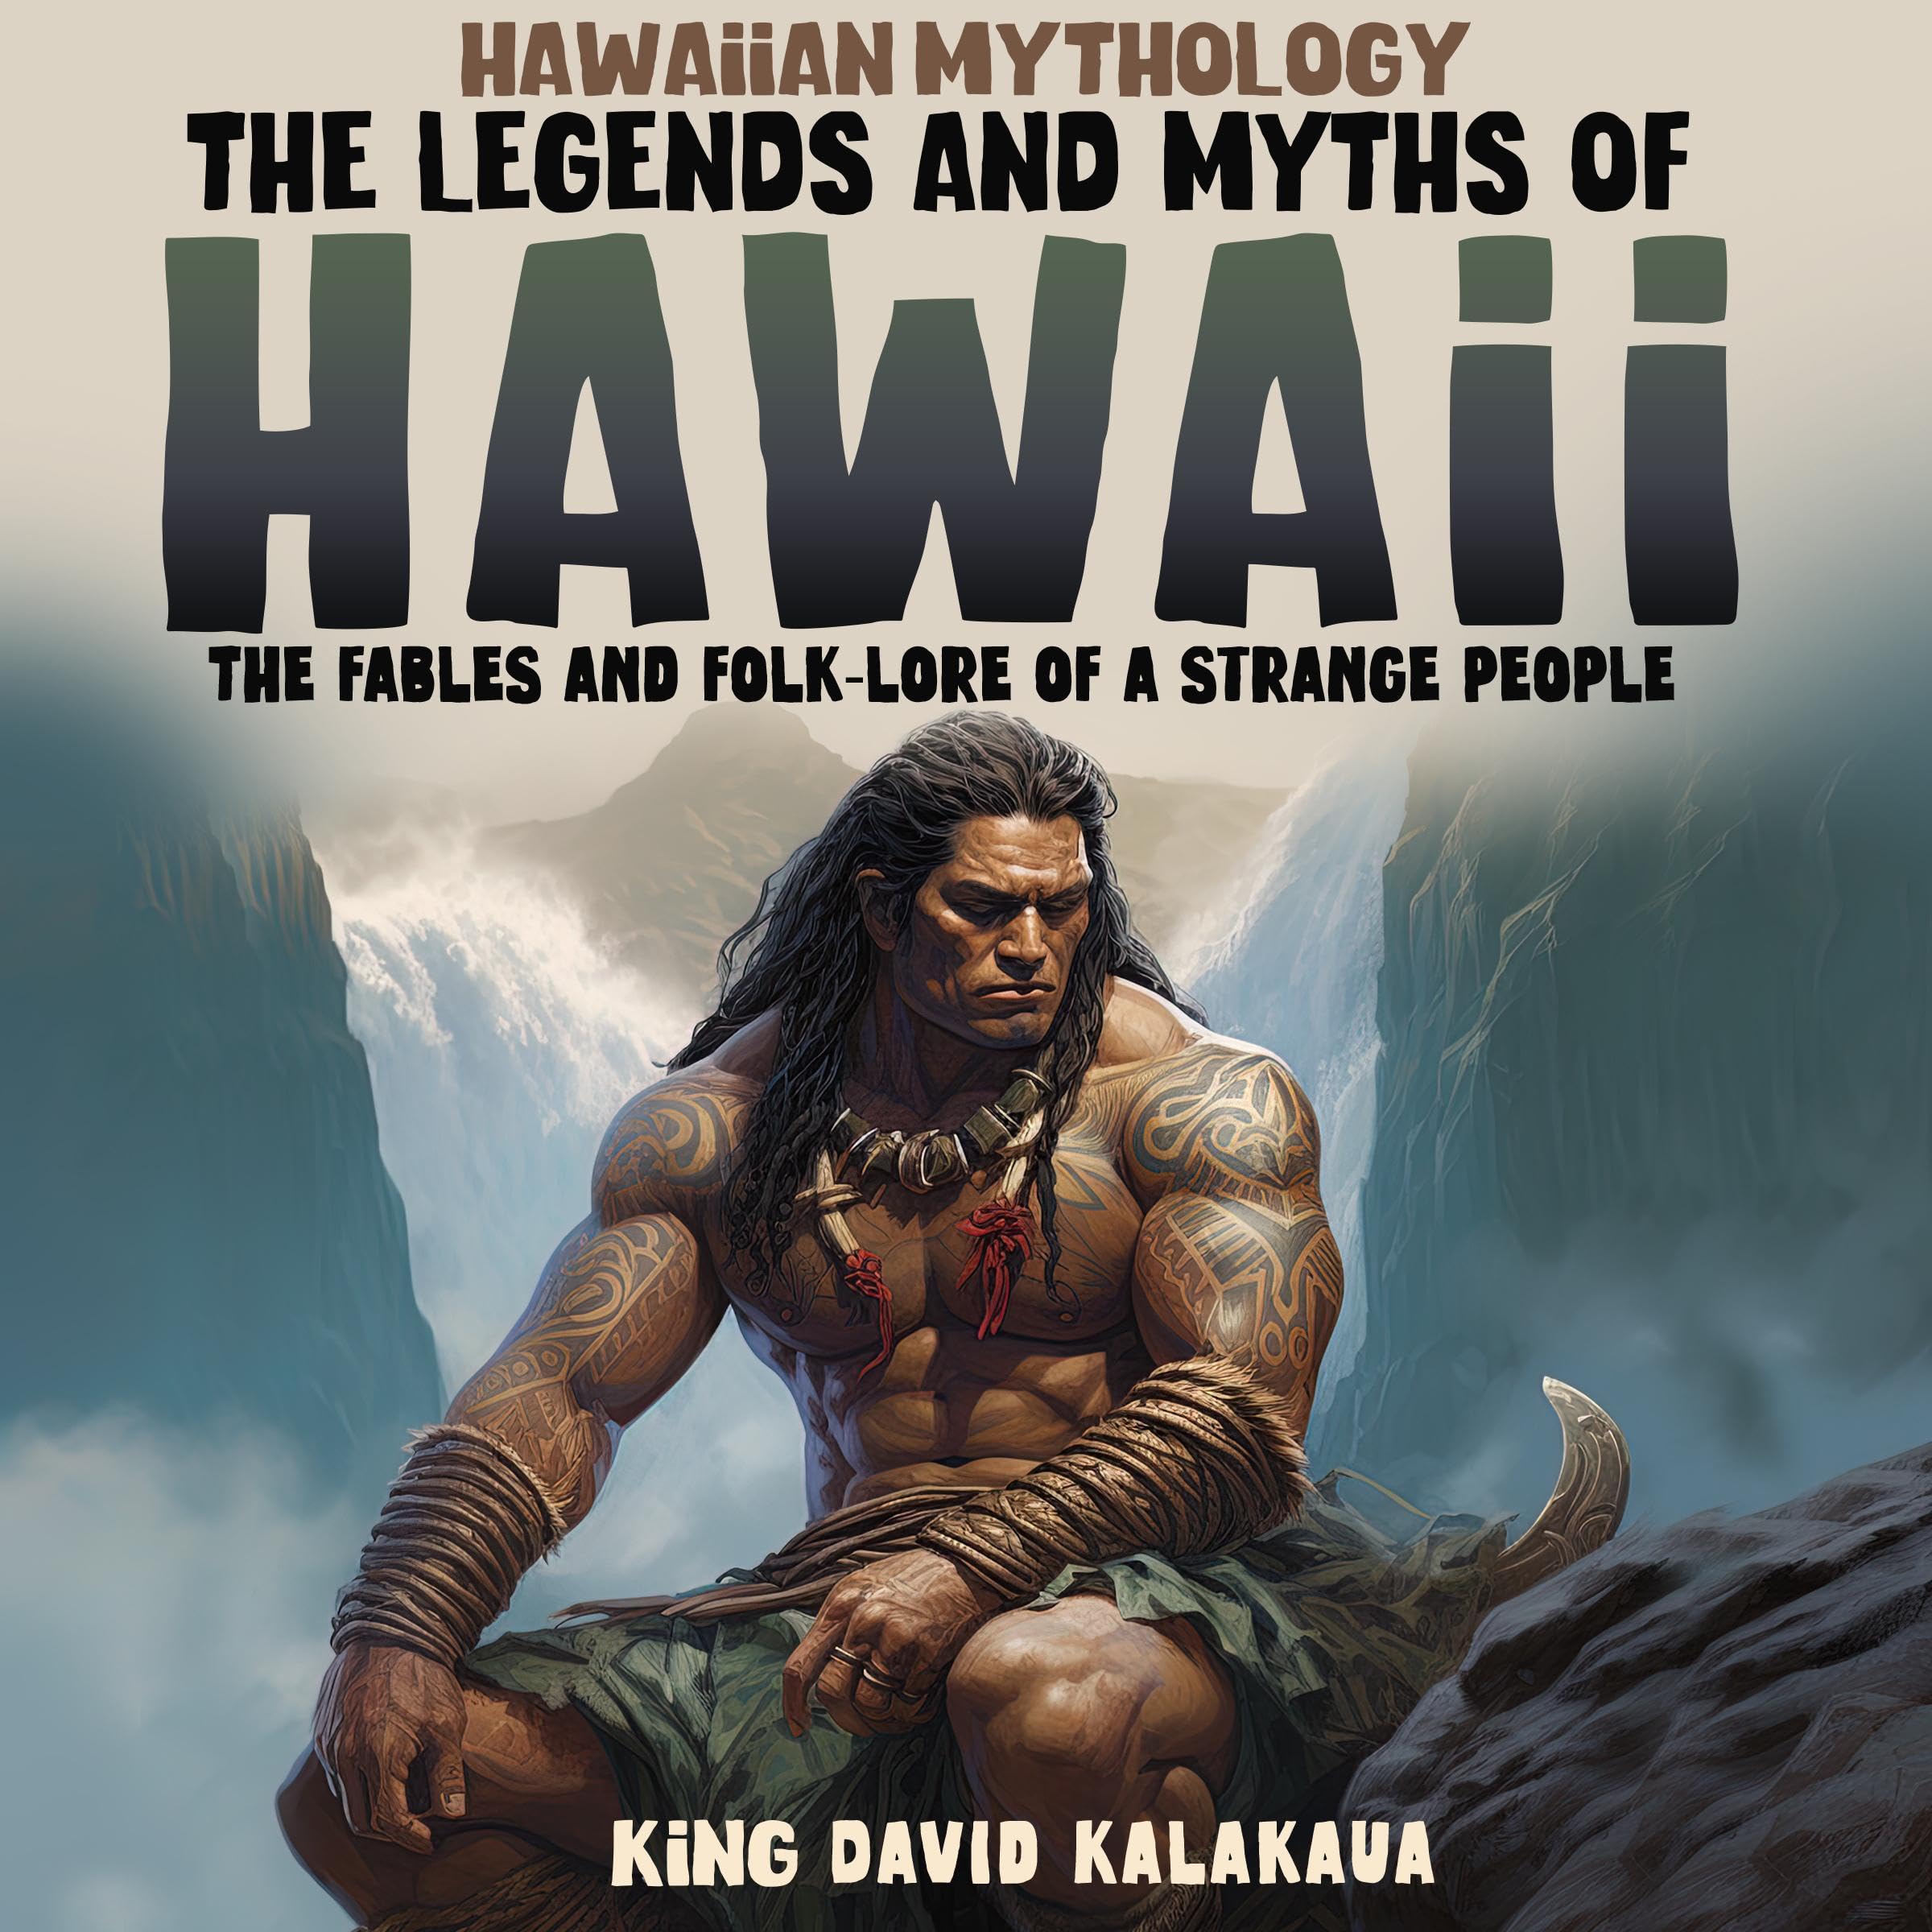 Hawaiian Mythology: The Legends and Myths of Hawaii: The Fables and Folk-Lore of a Strange People